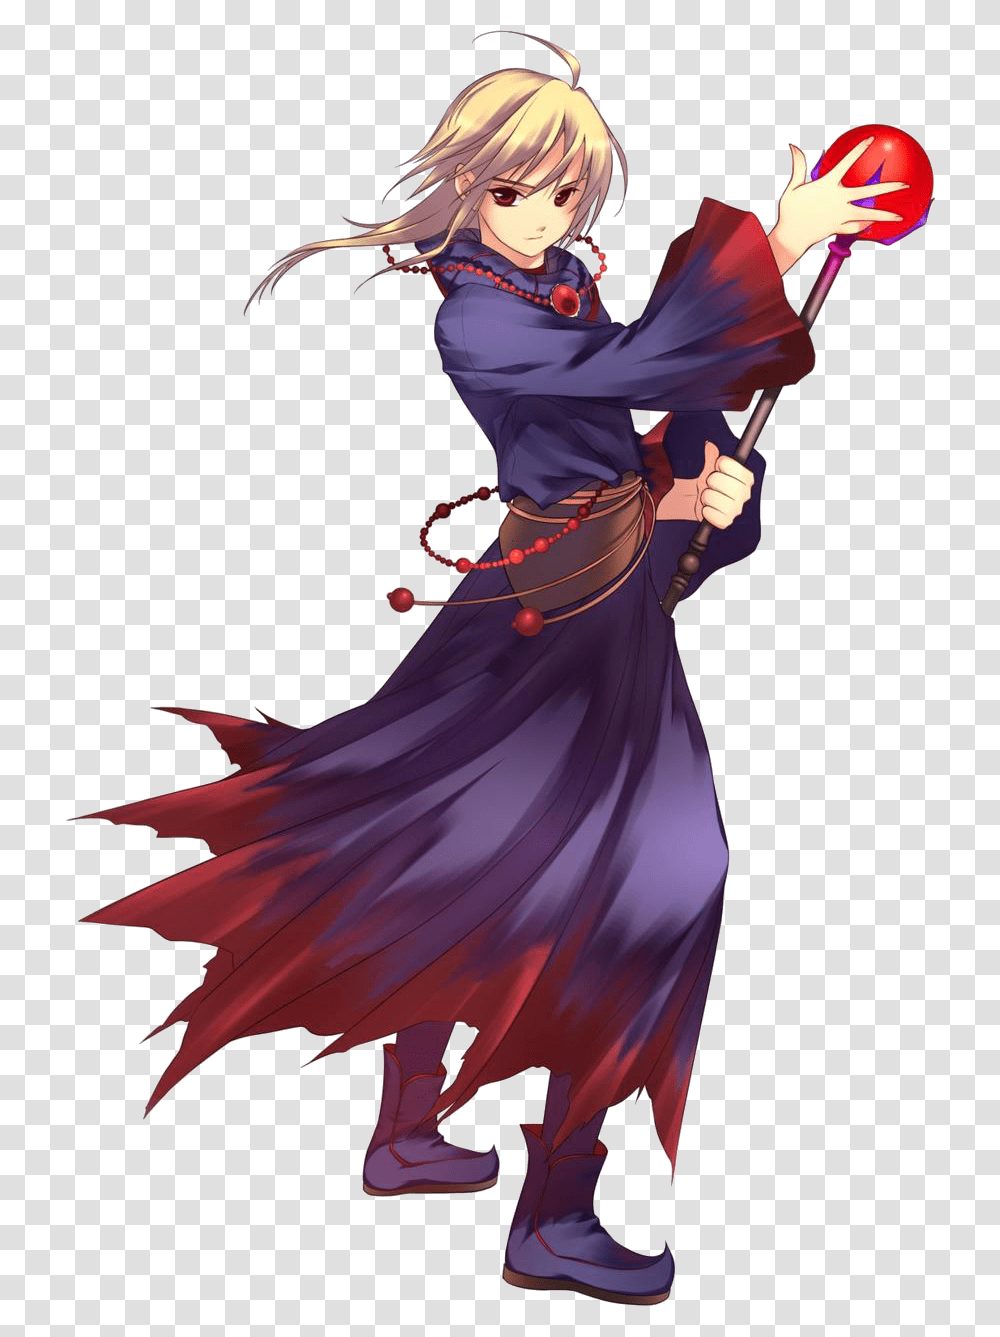 Anime Wizard Illustration, Person, Human, Performer, Dance Pose Transparent Png